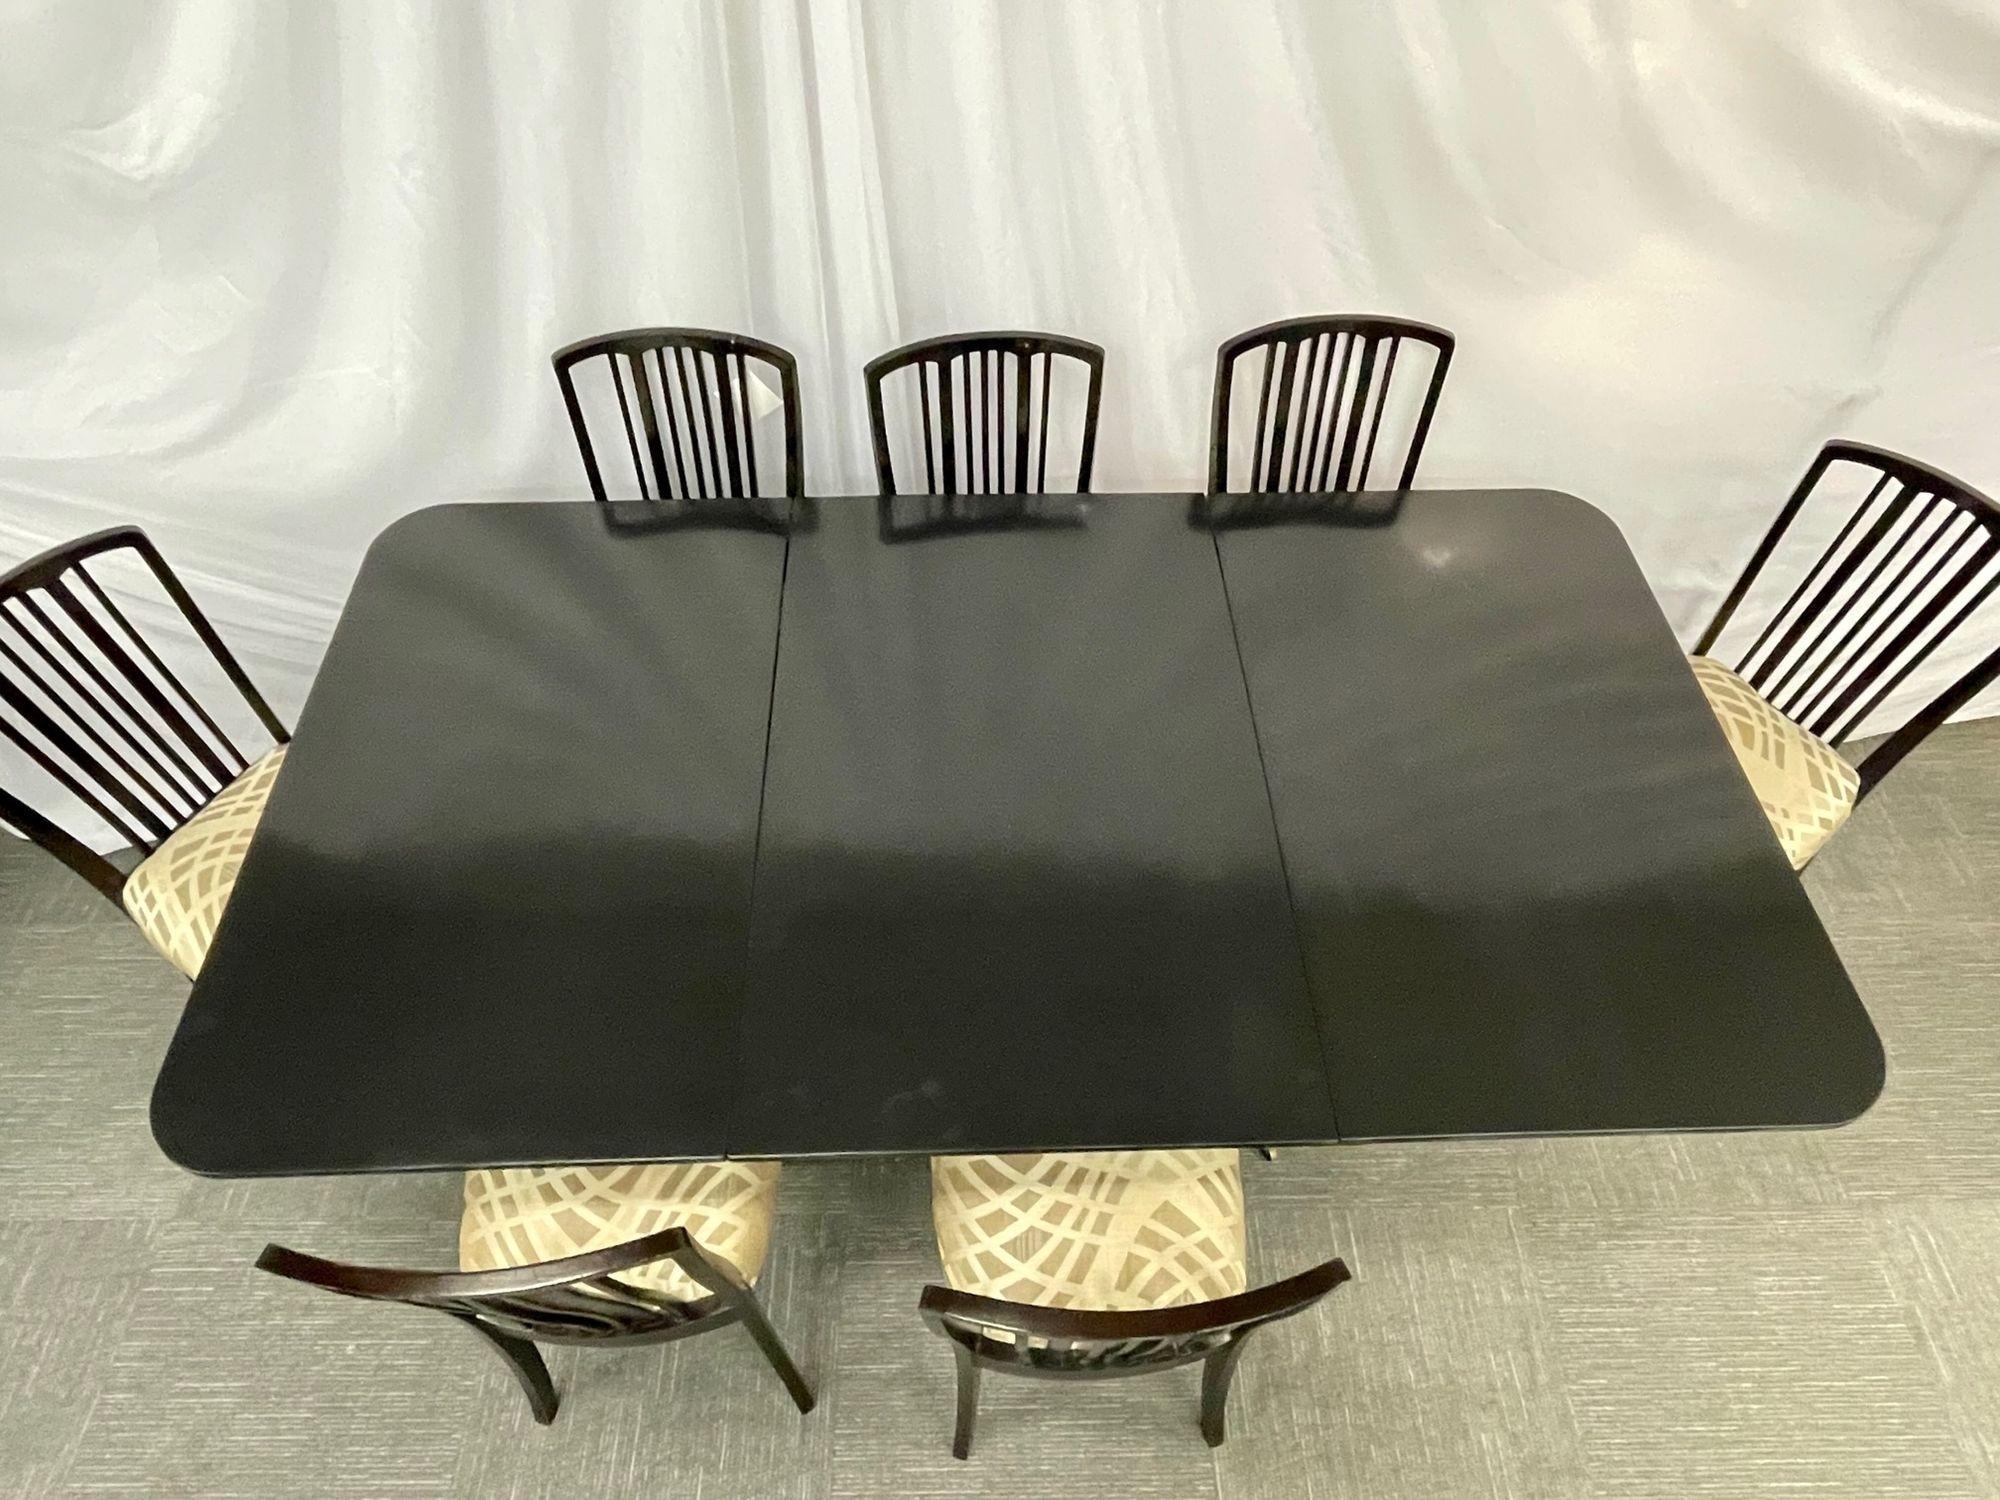 Hollywood Regency Triple Pedestal Ebony Dining Table, Maison Jansen In Good Condition For Sale In Stamford, CT